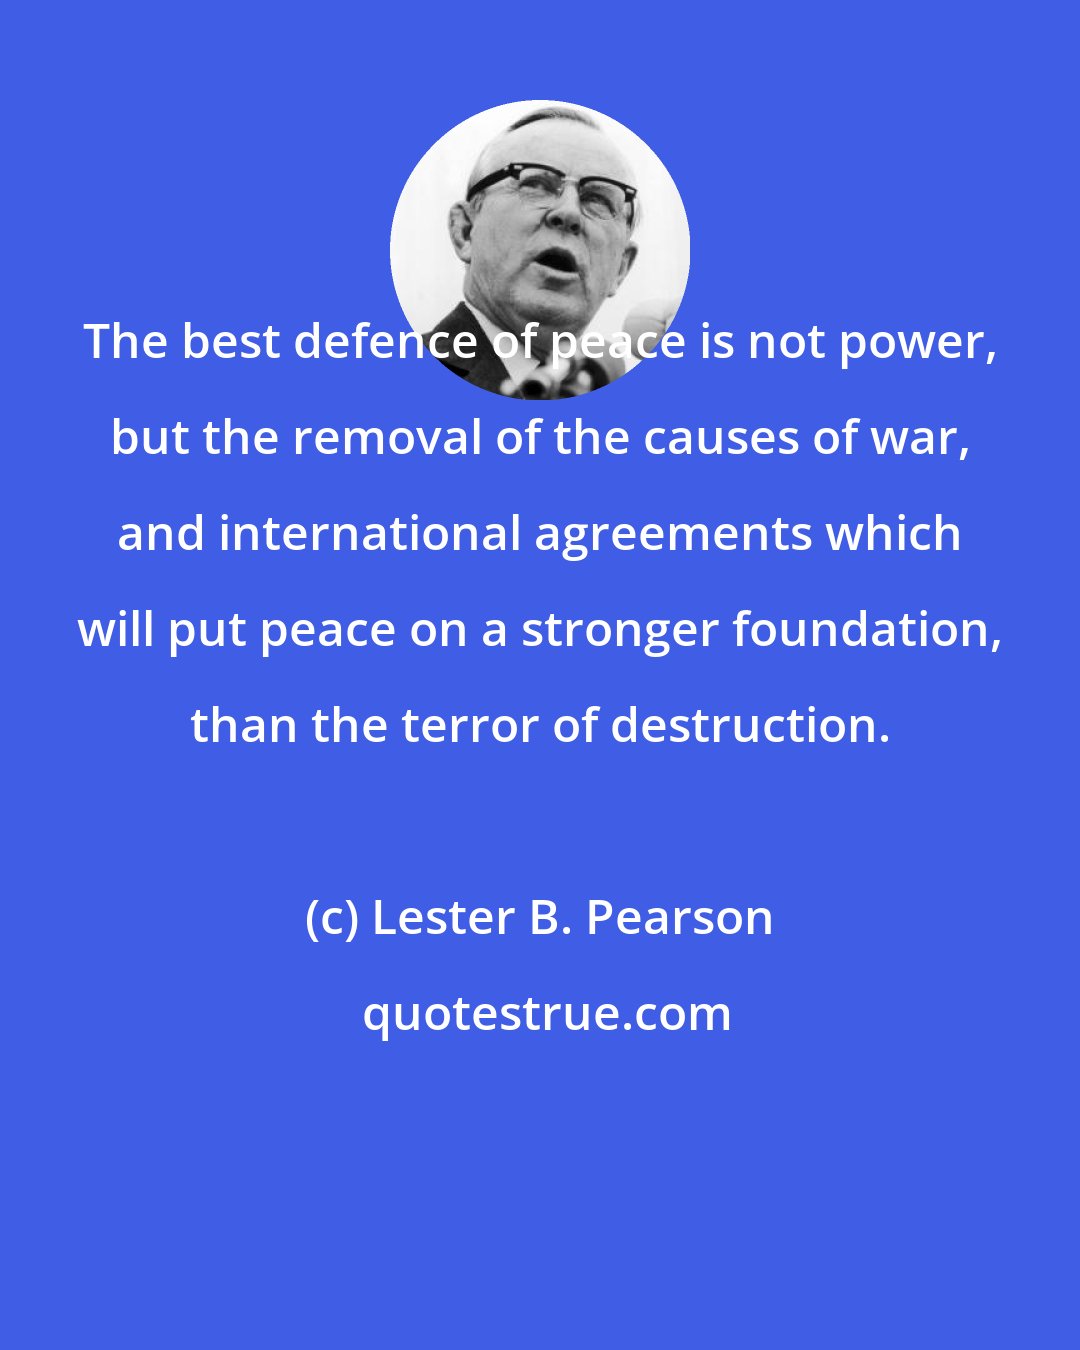 Lester B. Pearson: The best defence of peace is not power, but the removal of the causes of war, and international agreements which will put peace on a stronger foundation, than the terror of destruction.